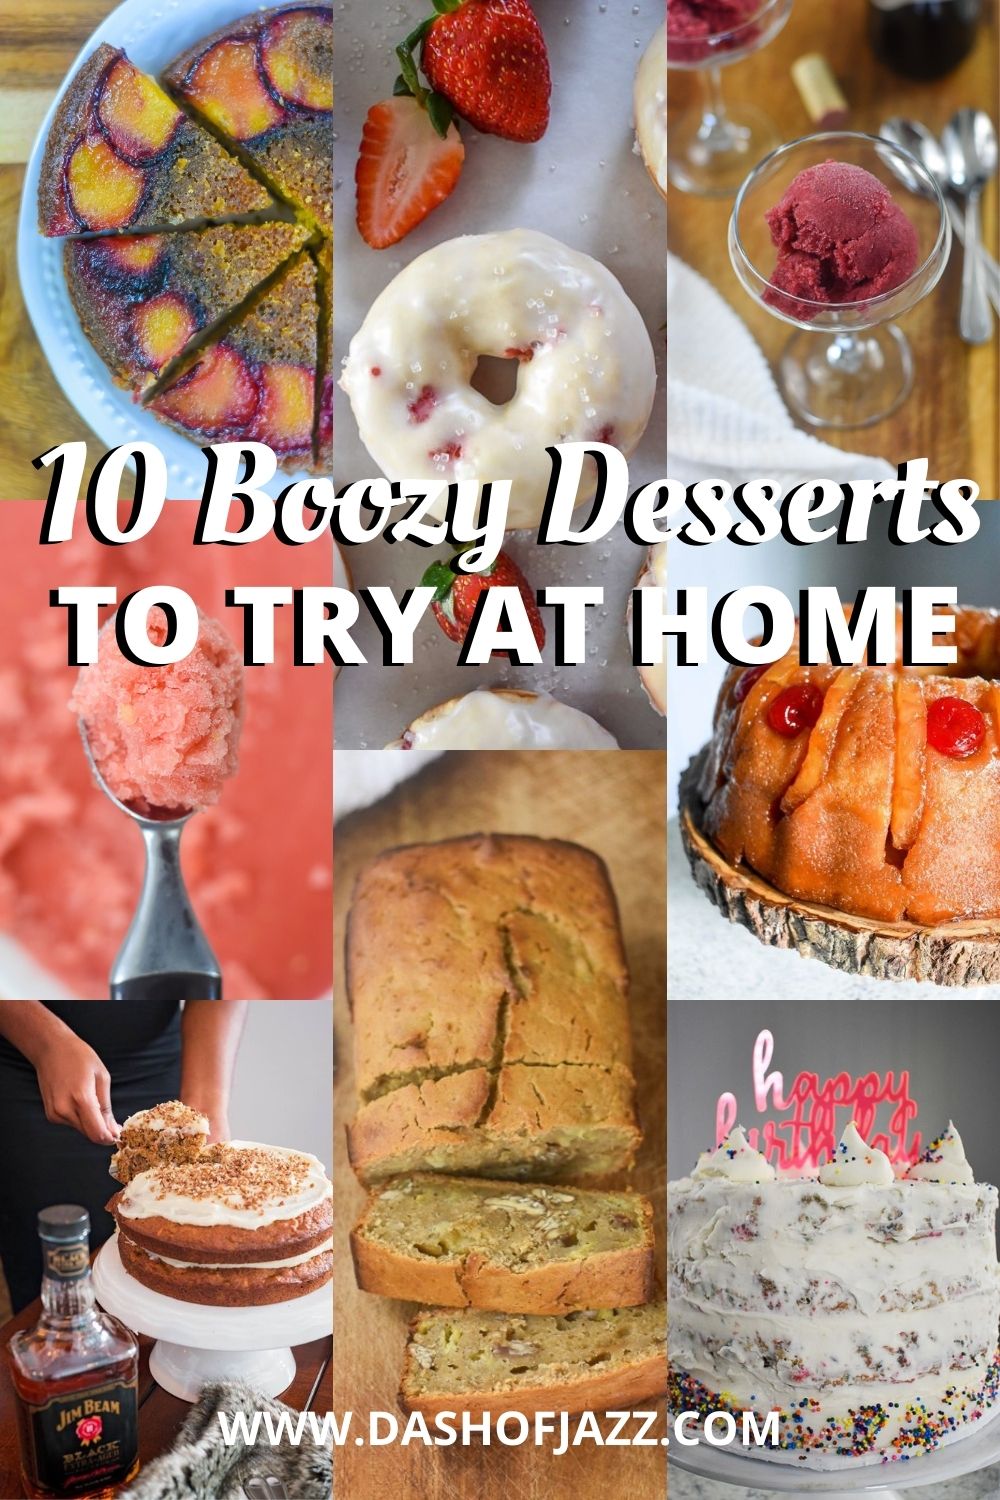 10 Boozy Dessert Recipes to Try at Home